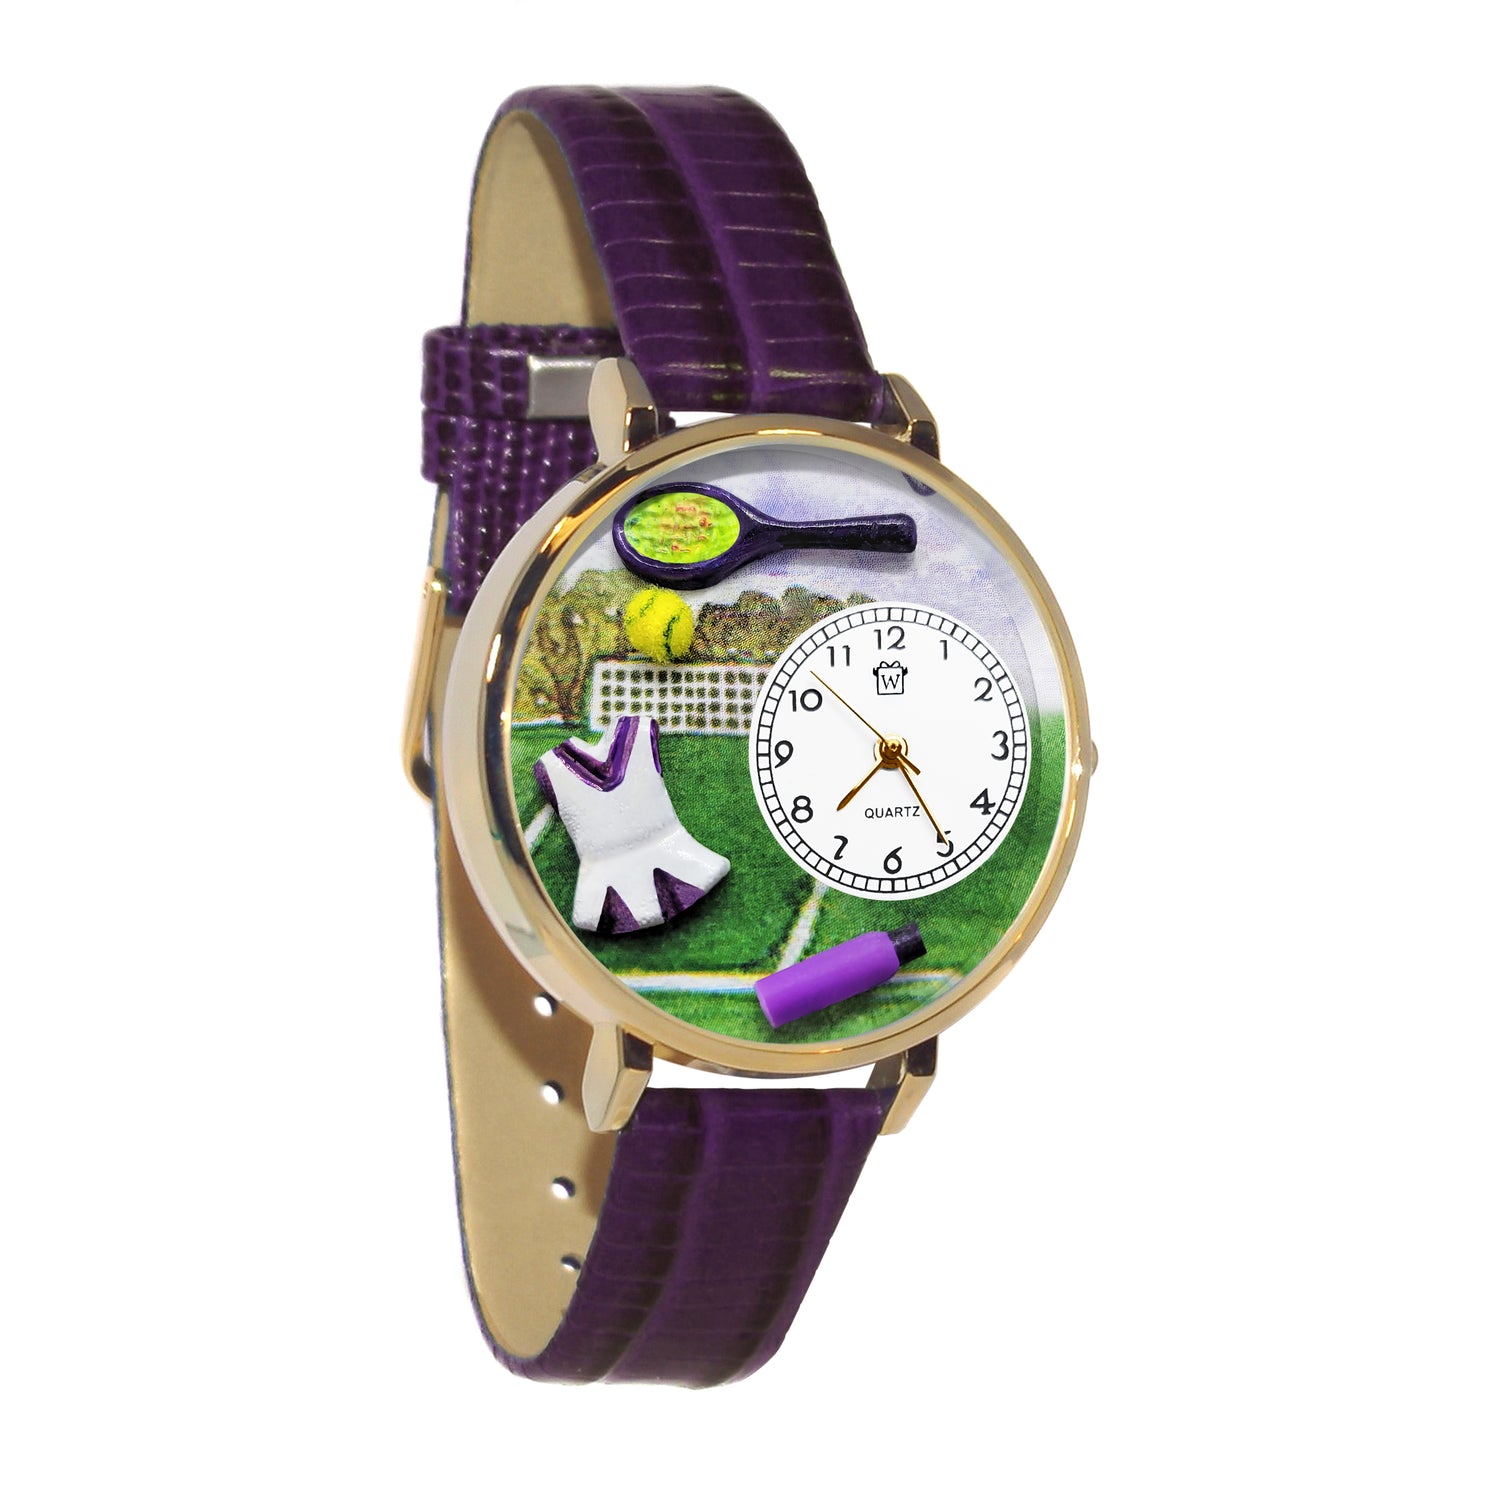 Whimsical Gifts | Tennis 3D Watch Large Style | Handmade in USA | Hobbies & Special Interests | Sports | Novelty Unique Fun Miniatures Gift | Gold Finish Purple Leather Watch Band